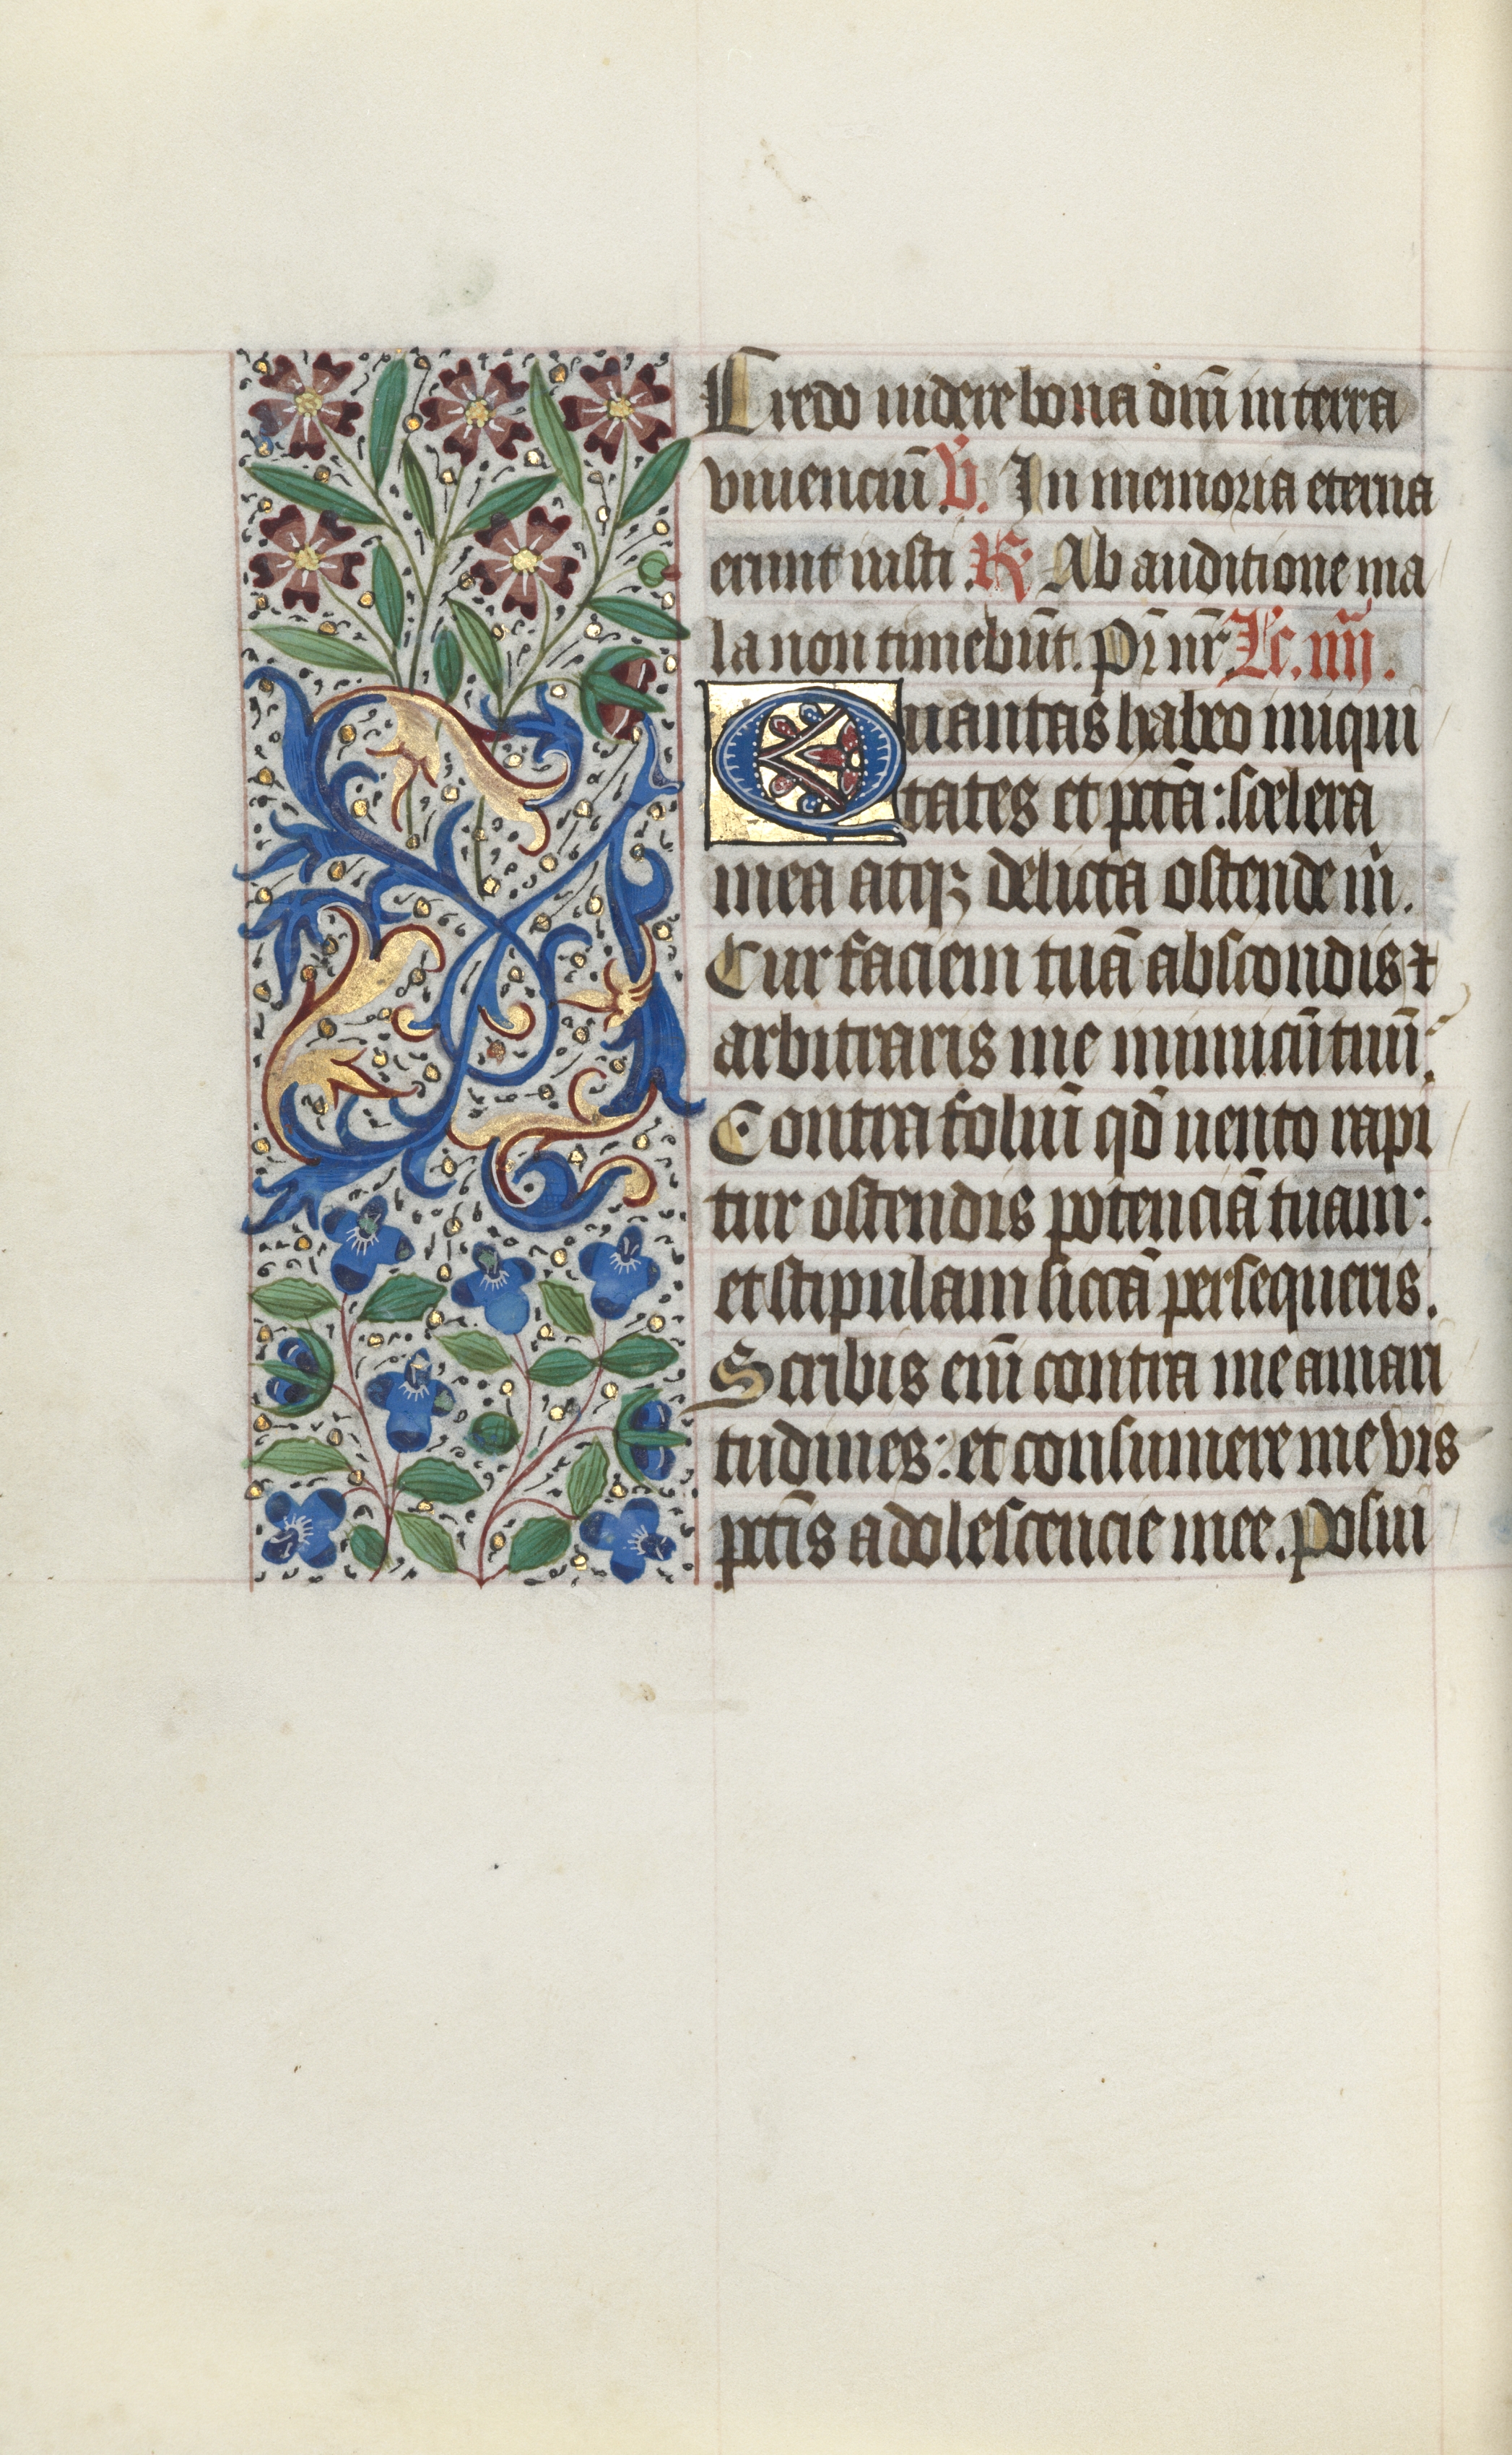 Book of Hours (Use of Rouen): fol. 122v